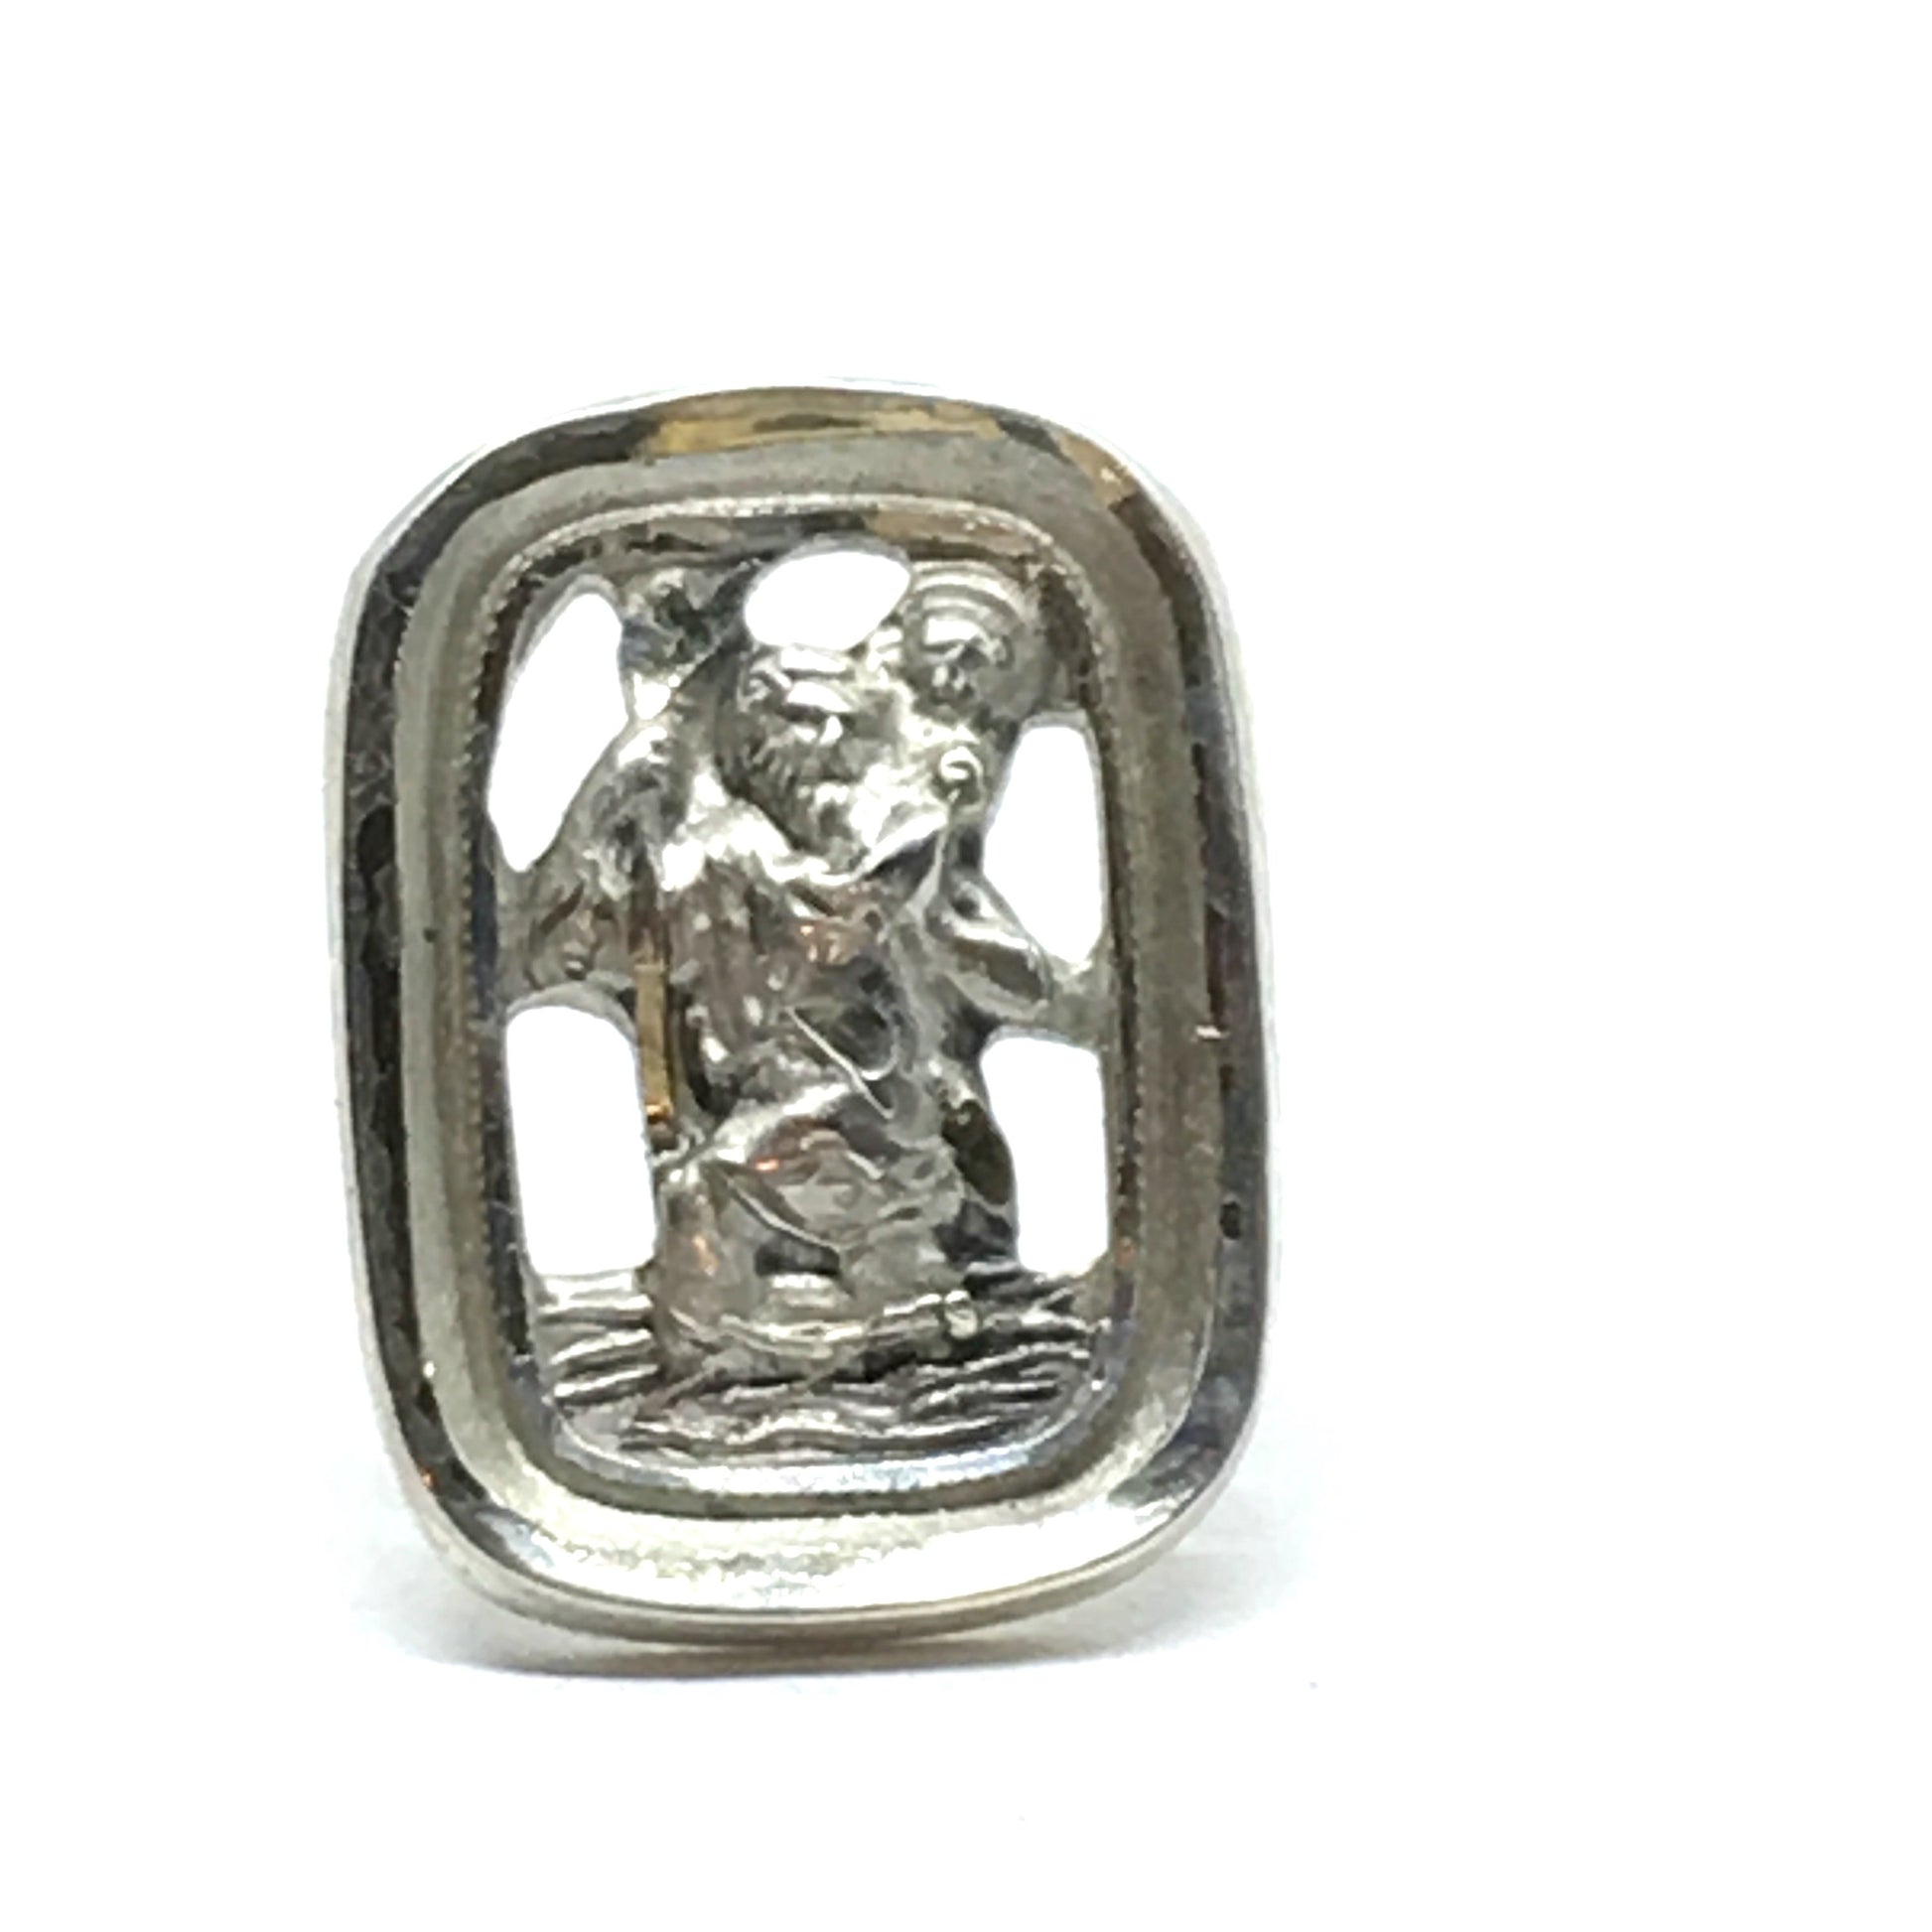 Mens Accessories - Vintage Swank Sterling Silver Religious Moses Walking Through Water Tie Tack ~ Blingschlingers Jewelry USA